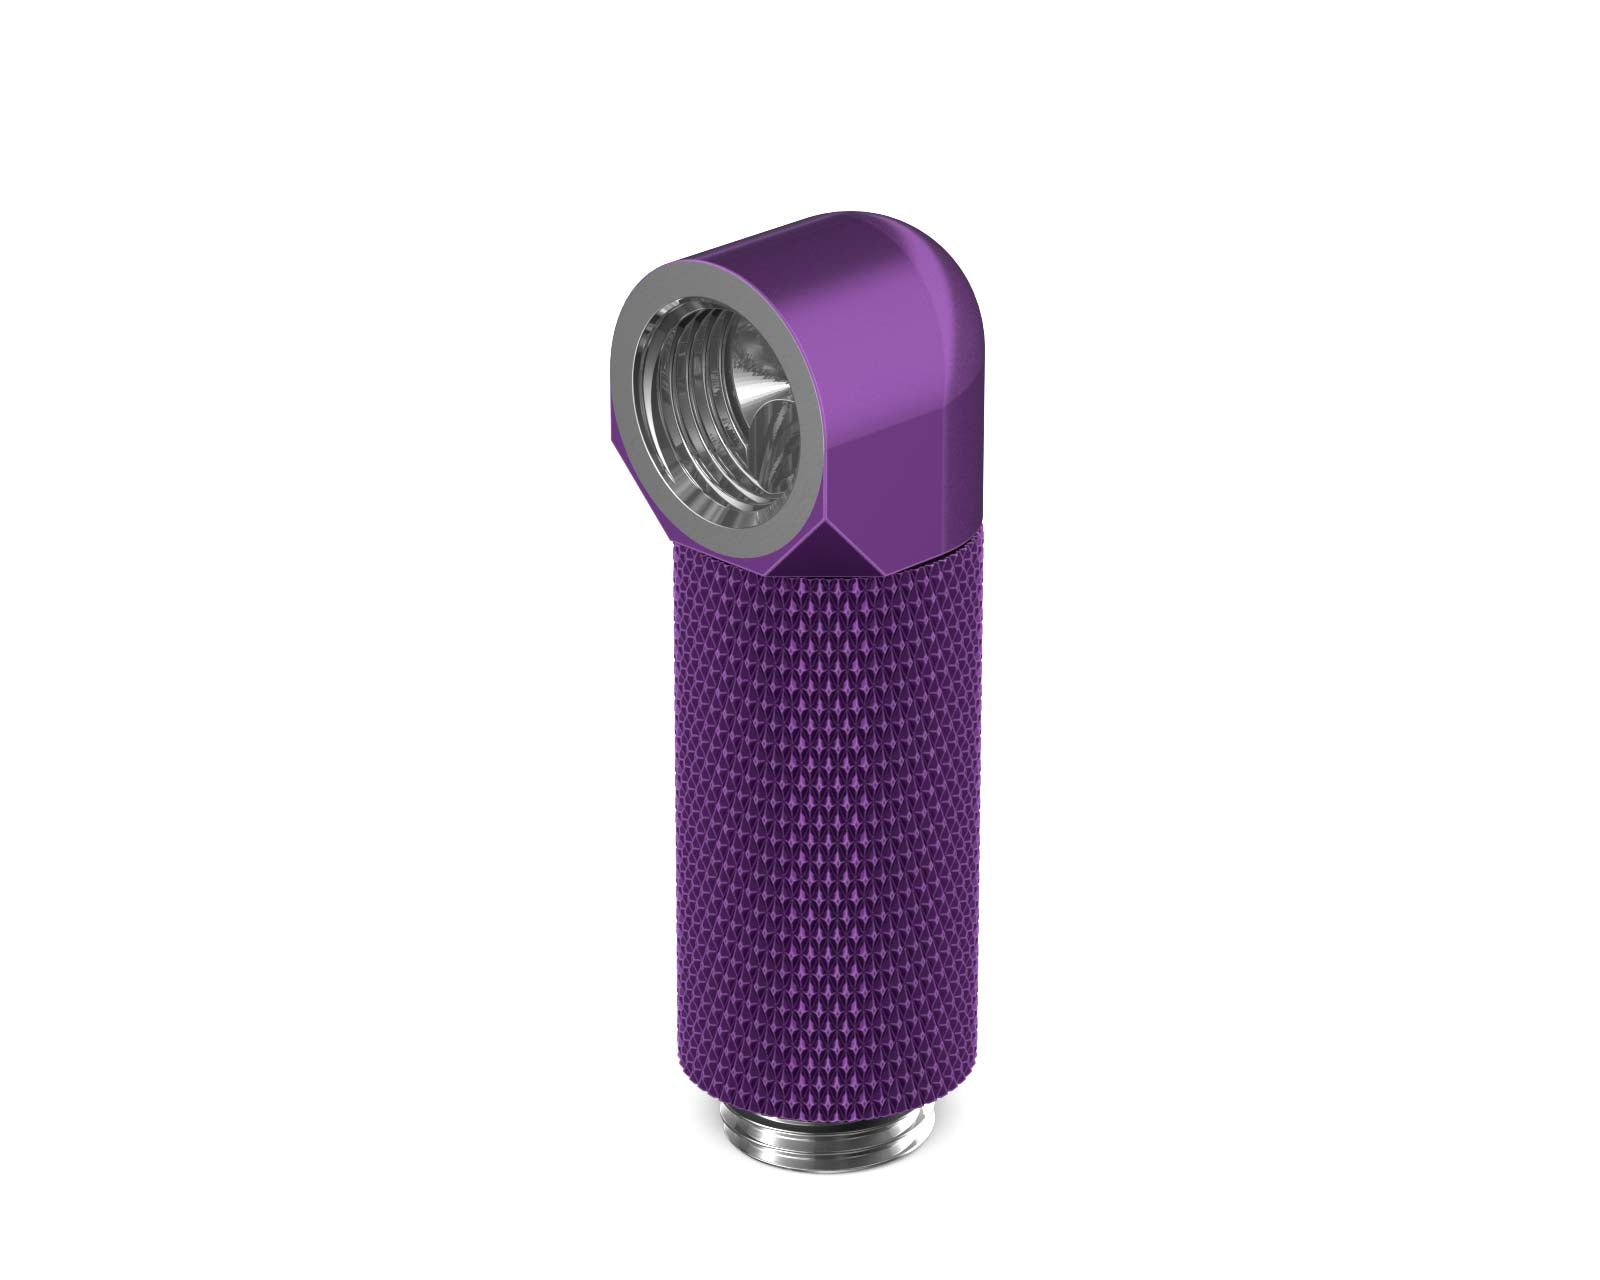 BSTOCK:PrimoChill Male to Female G 1/4in. 90 Degree SX Rotary 35mm Extension Elbow Fitting - Candy Purple - PrimoChill - KEEPING IT COOL